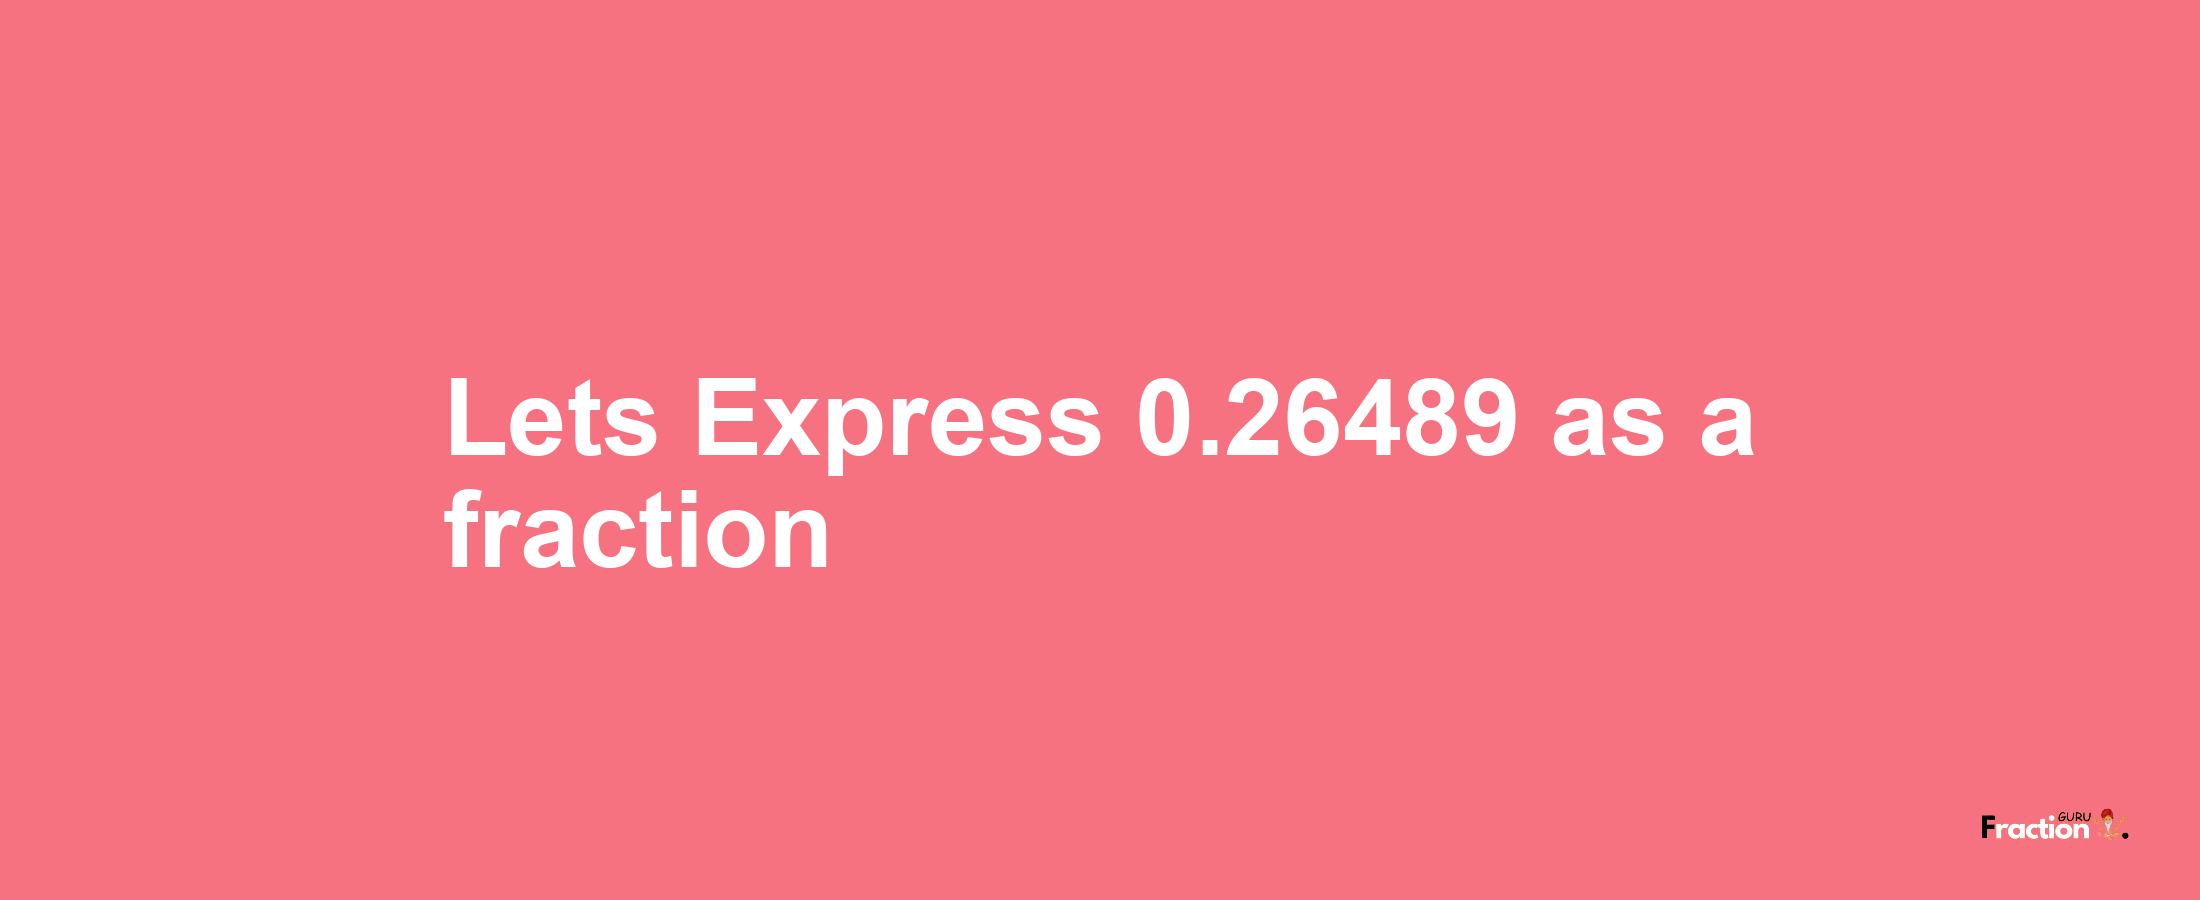 Lets Express 0.26489 as afraction